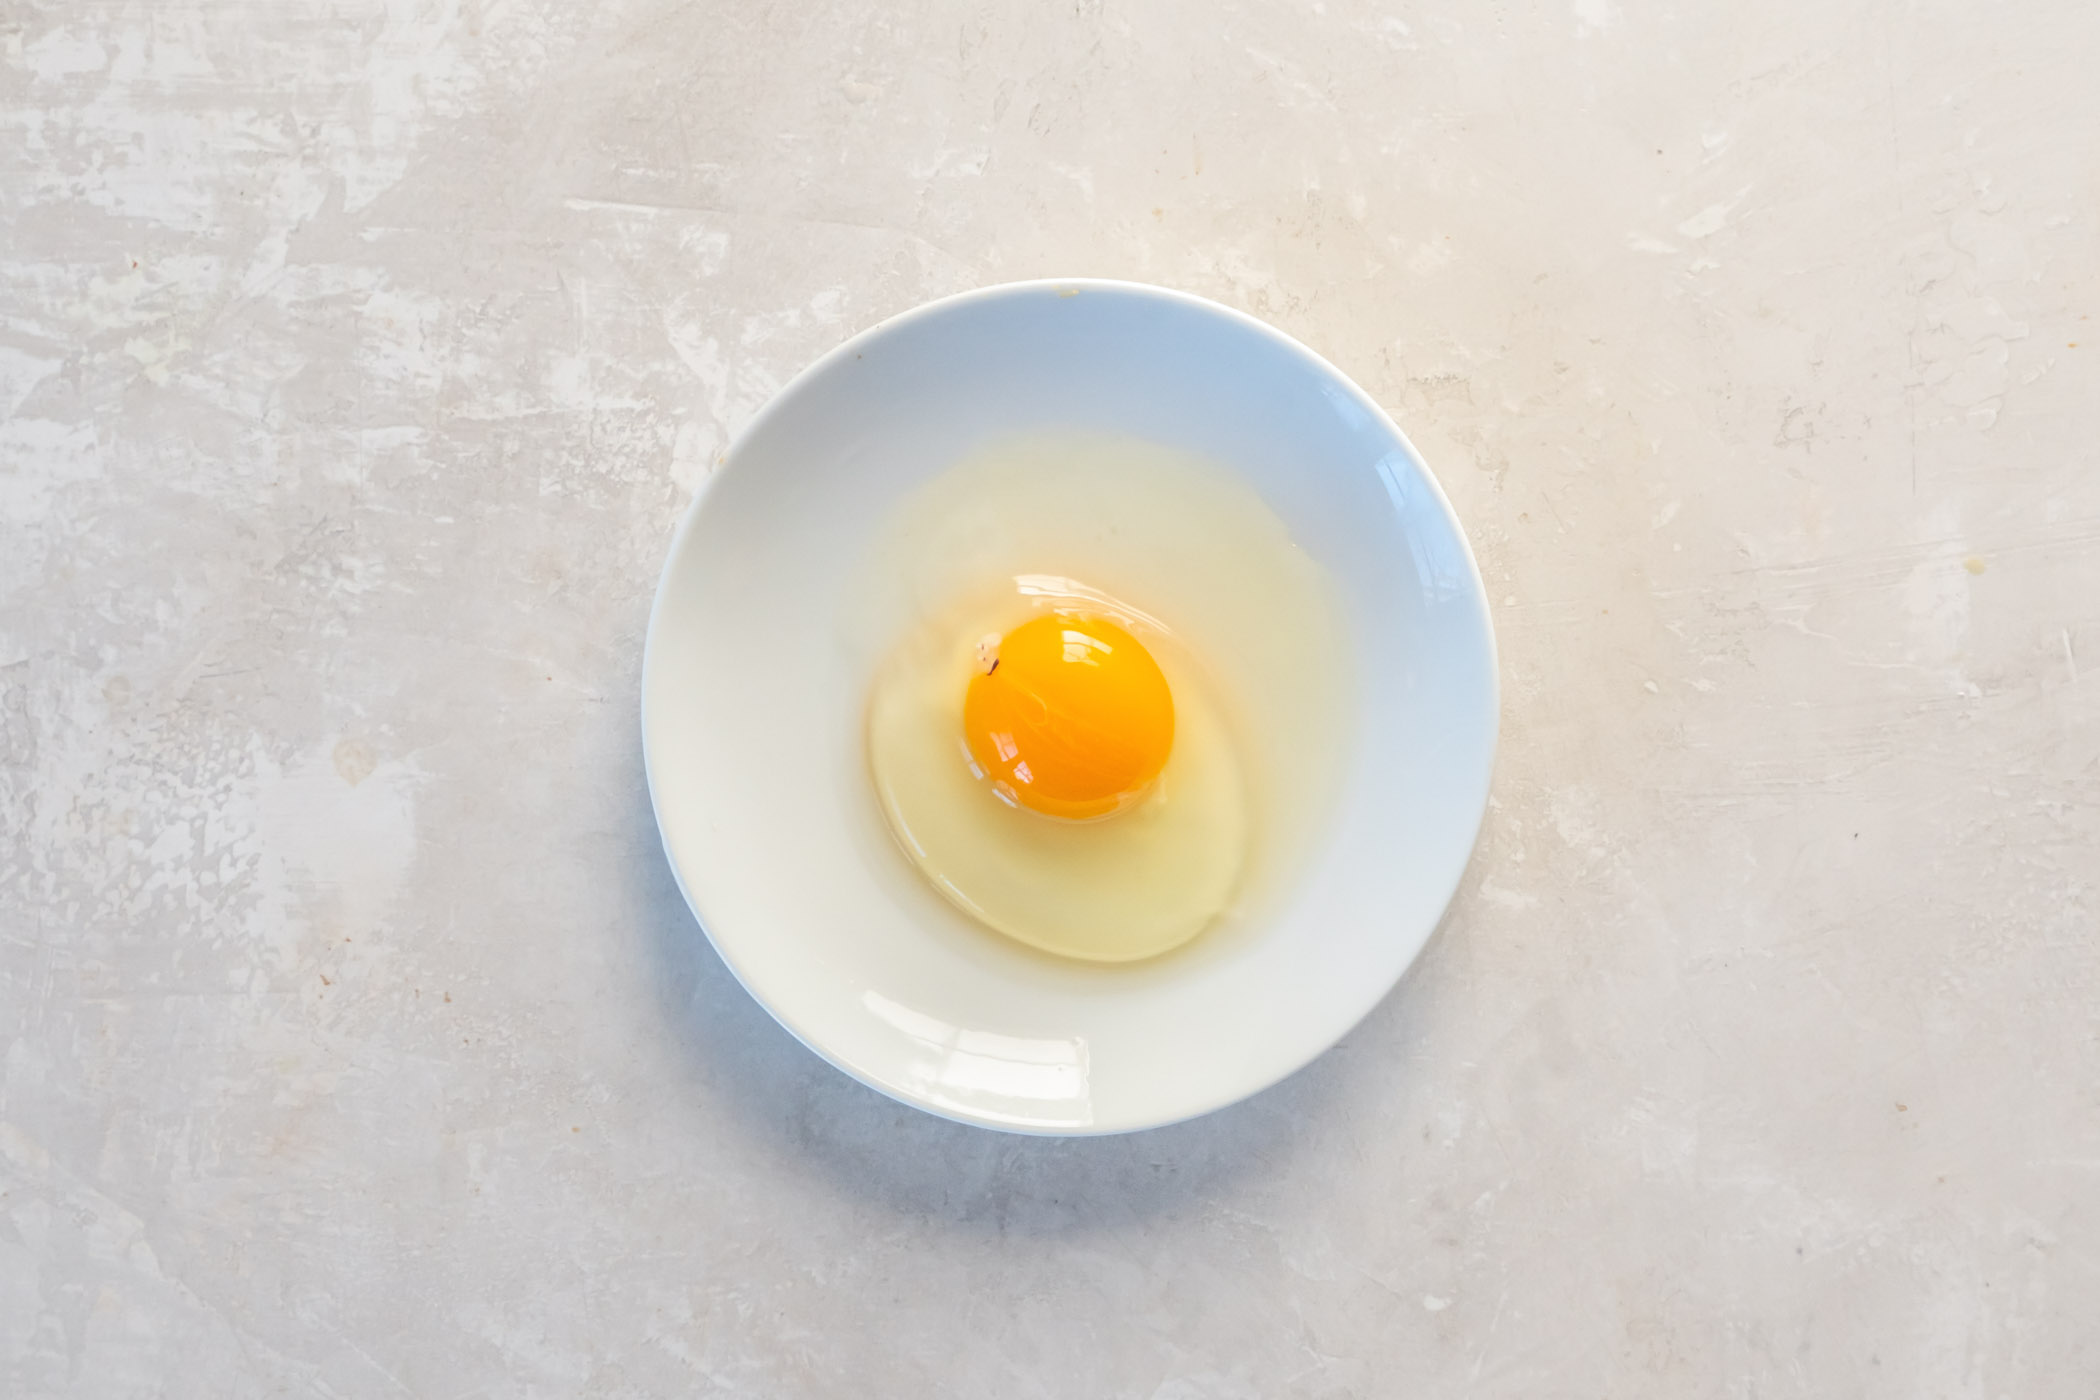 Egg cracked onto a plate showing firmer egg white and more watery egg white.